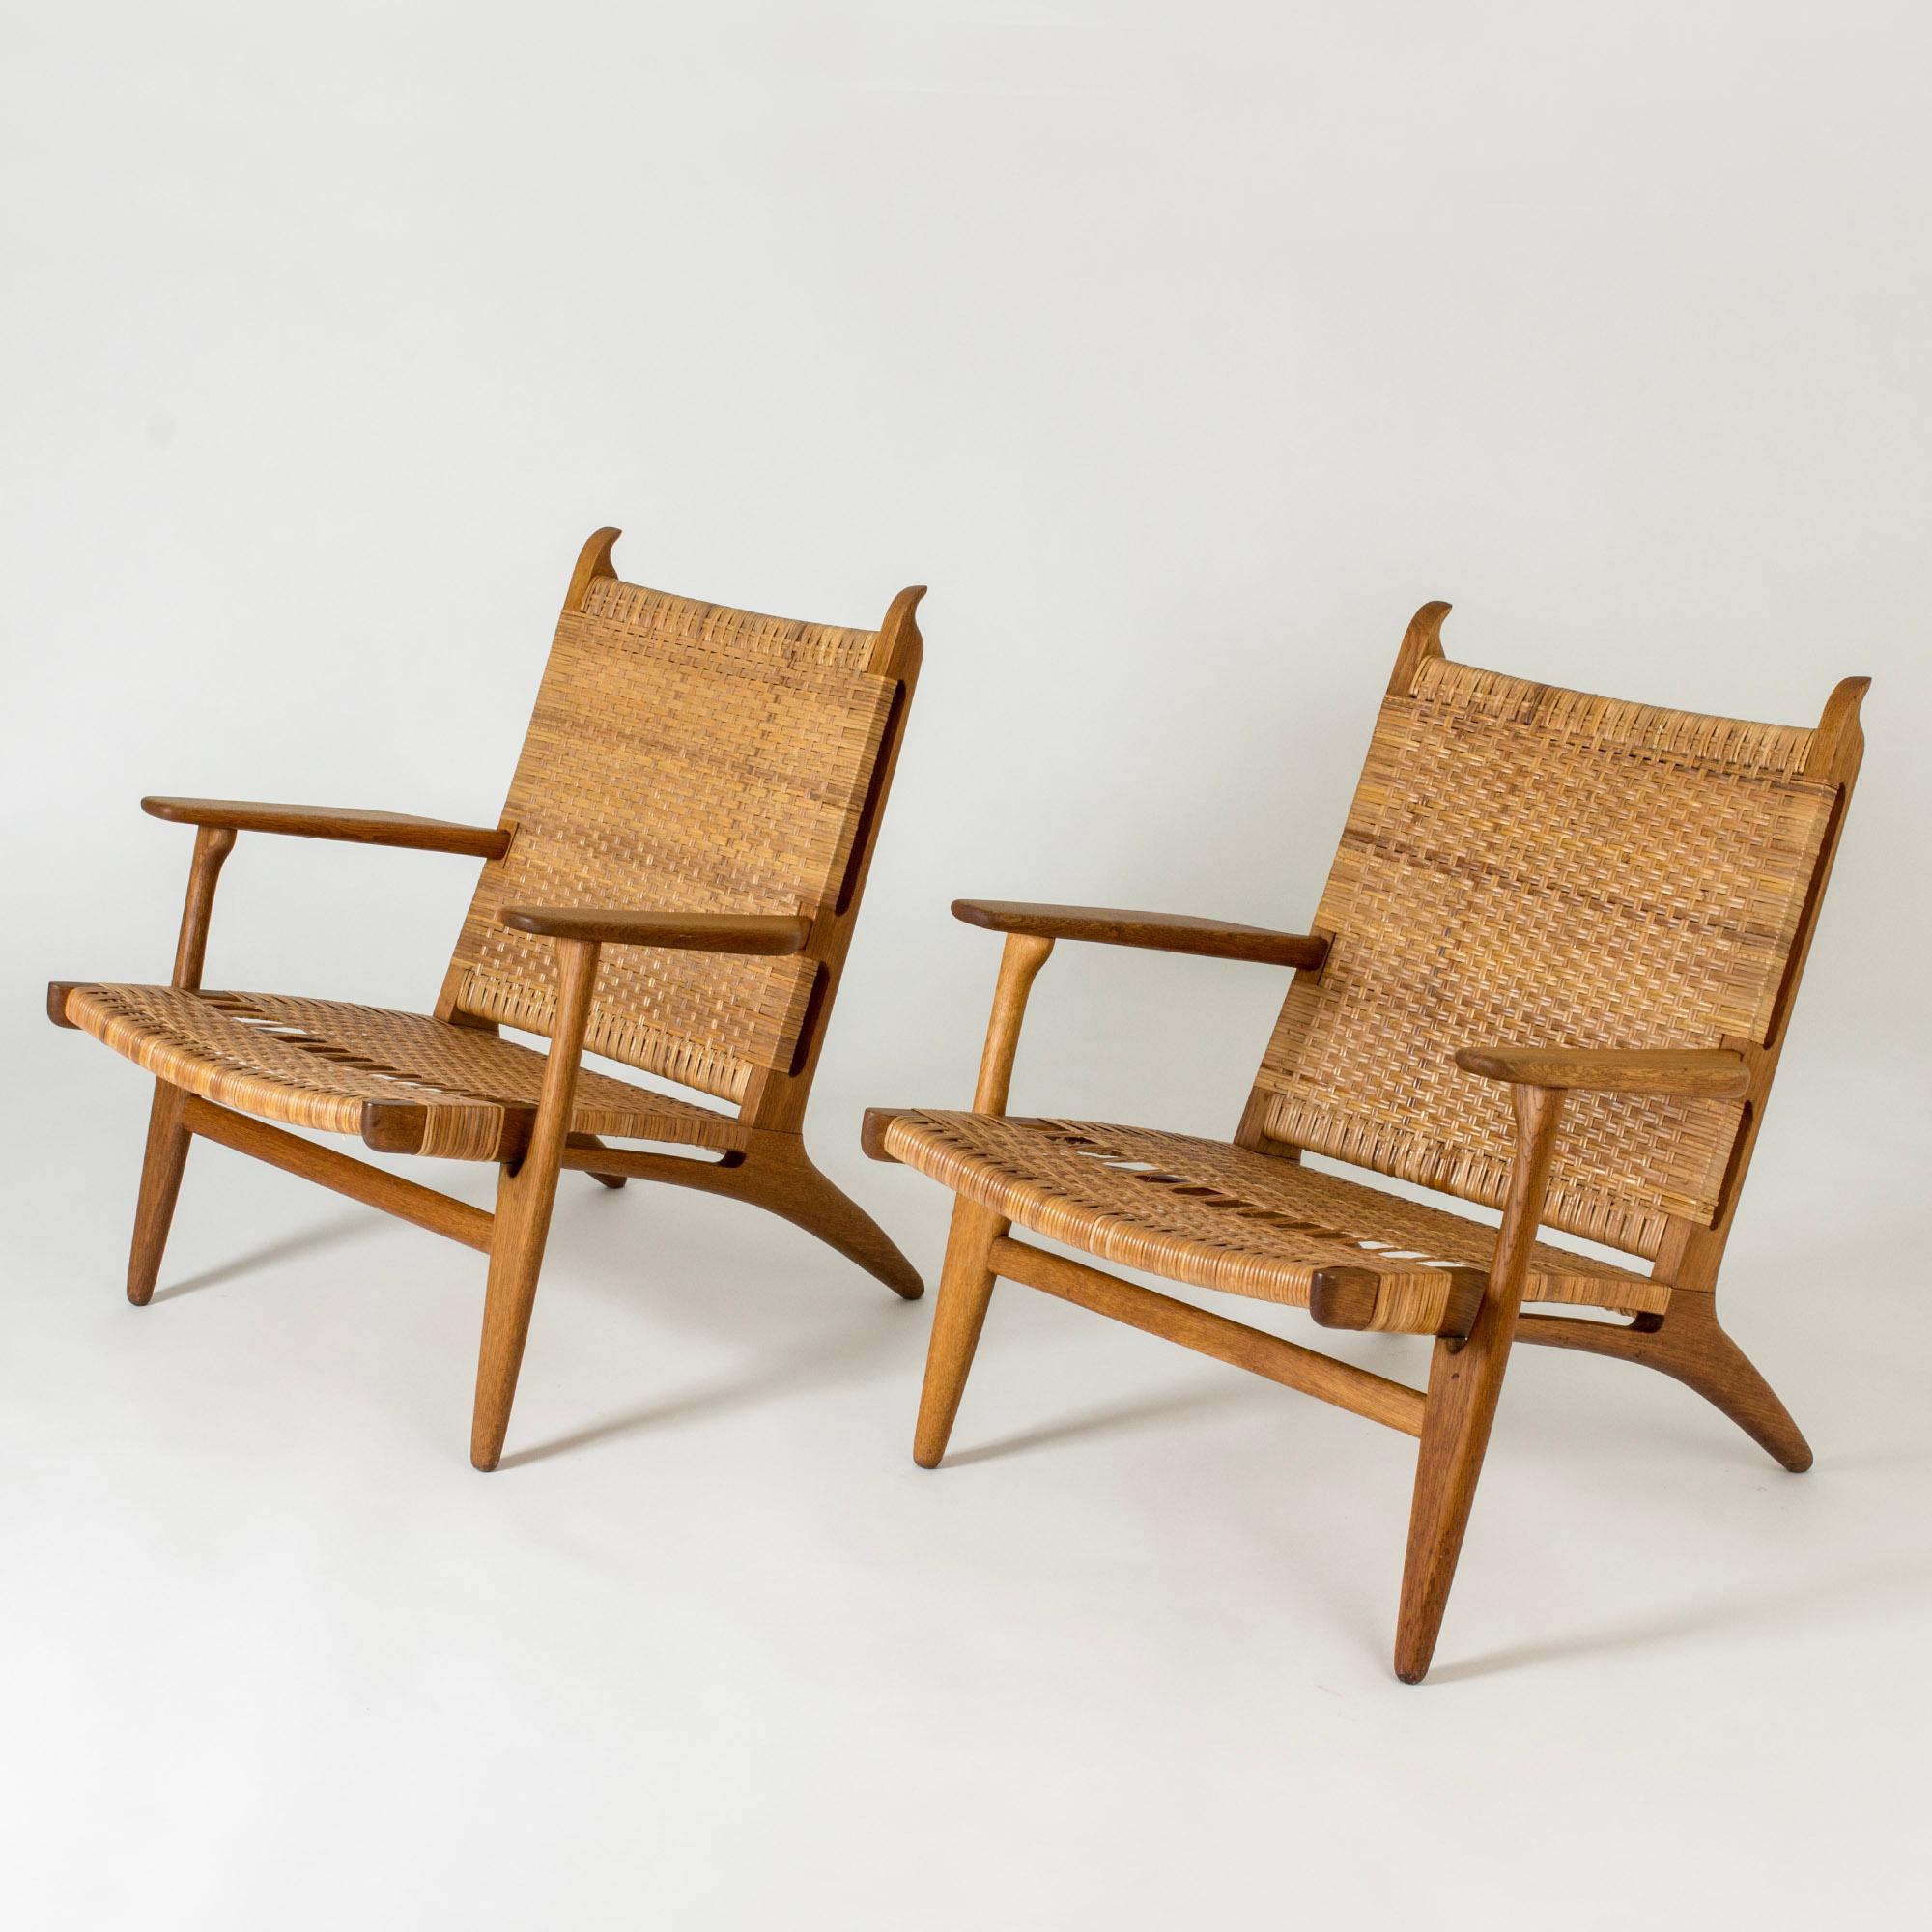 Pair of beautiful “CH 27” lounge chairs by Hans J. Wegner, made from oak and rattan. Beautiful pattern in the rattan and whimsical carved “horns” at the tops of the backs.